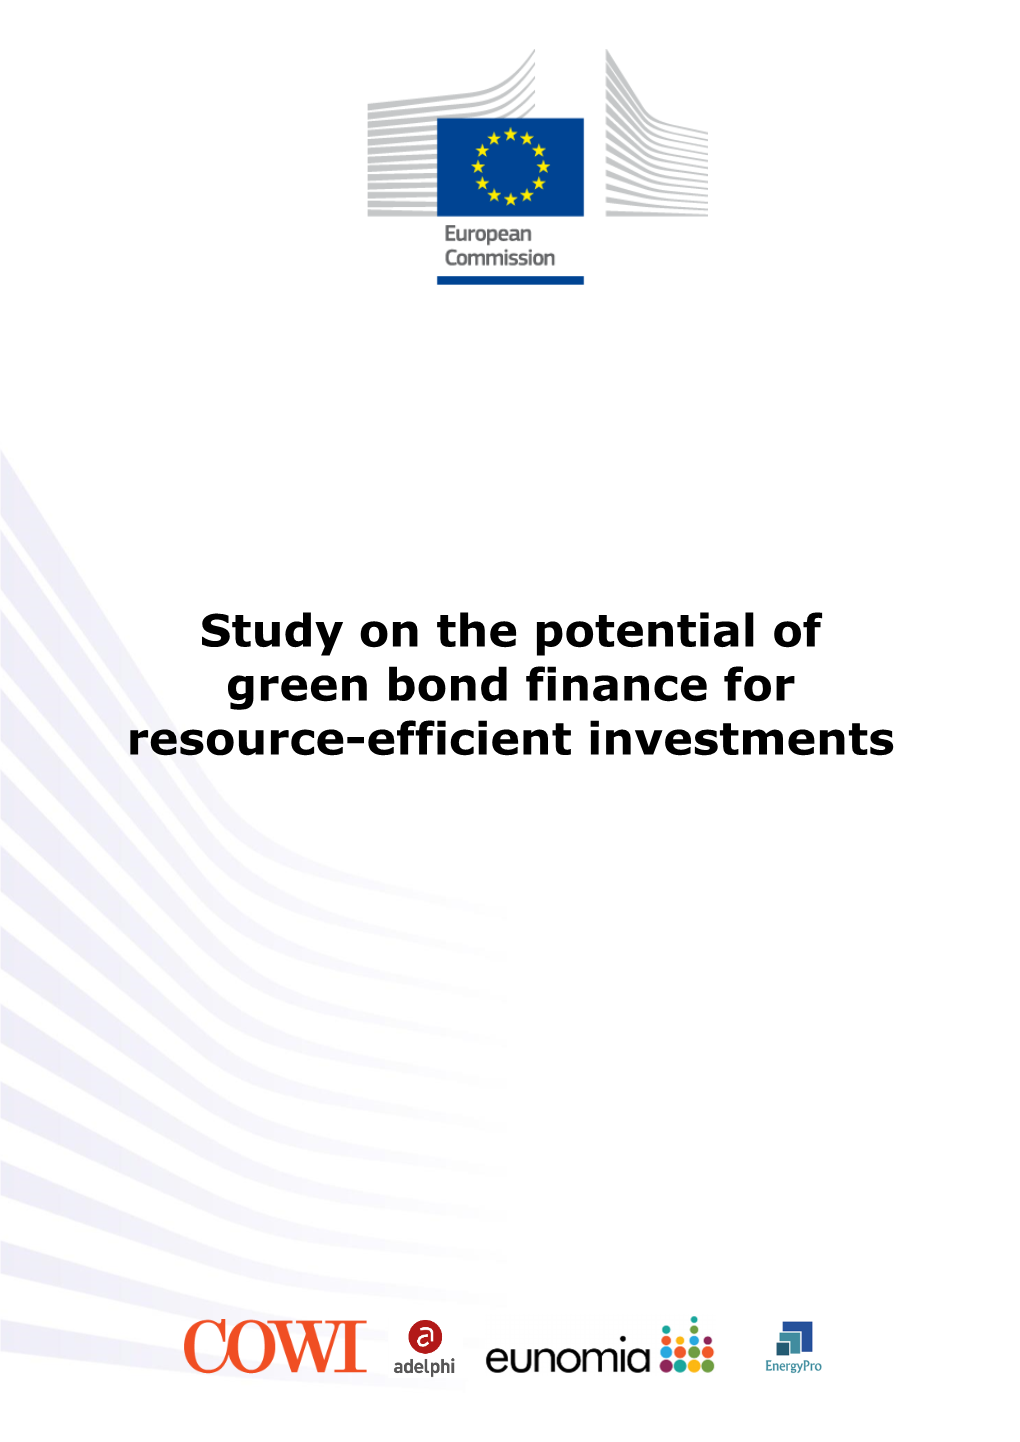 Study on the Potential of Green Bond Finance for Resource-Efficient Investments